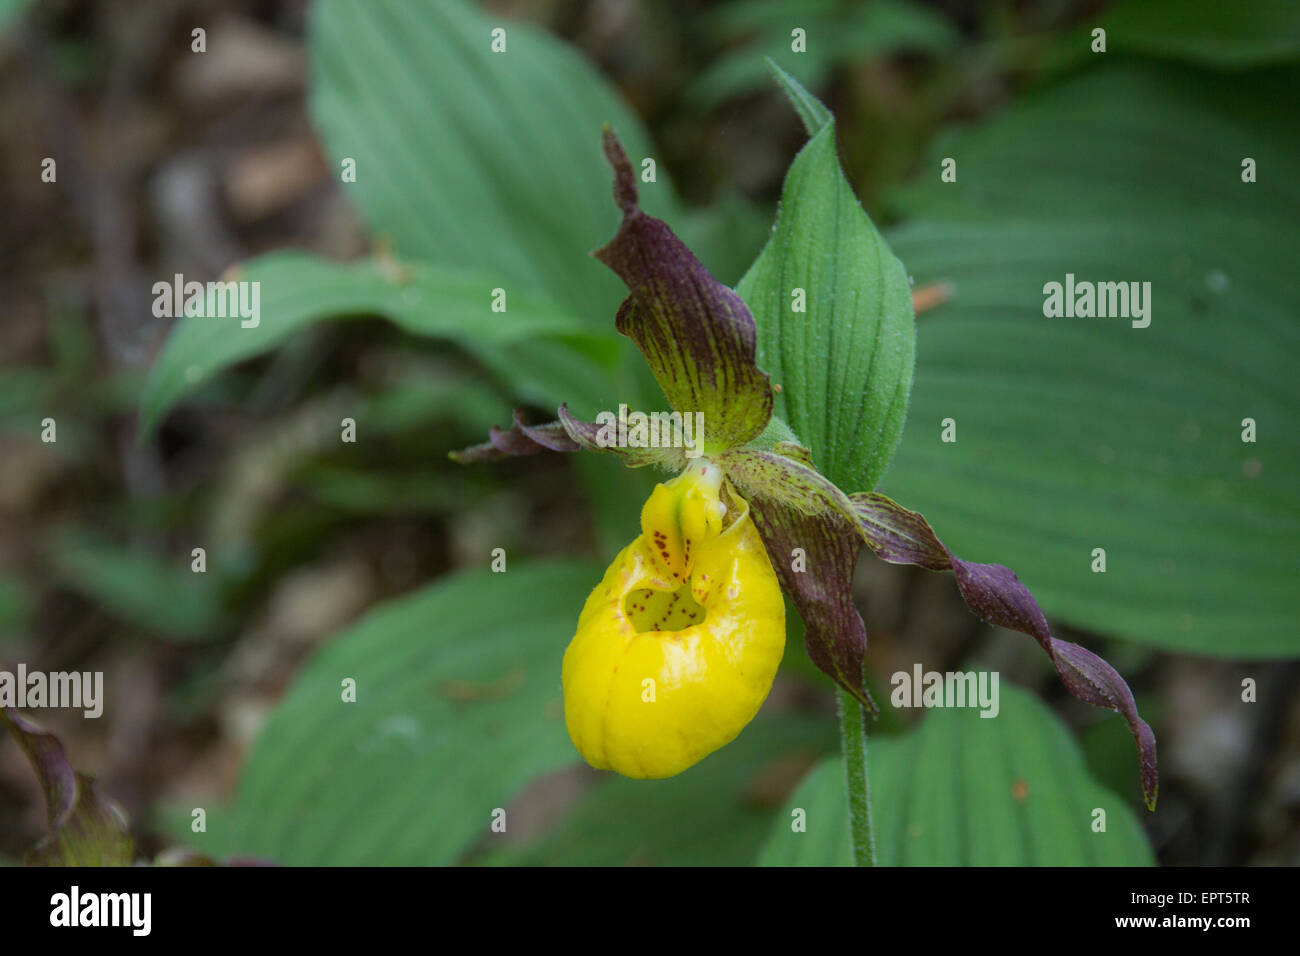 A close-up of a Large Yellow Lady's Slipper in a Pennsylvania forest. Stock Photo